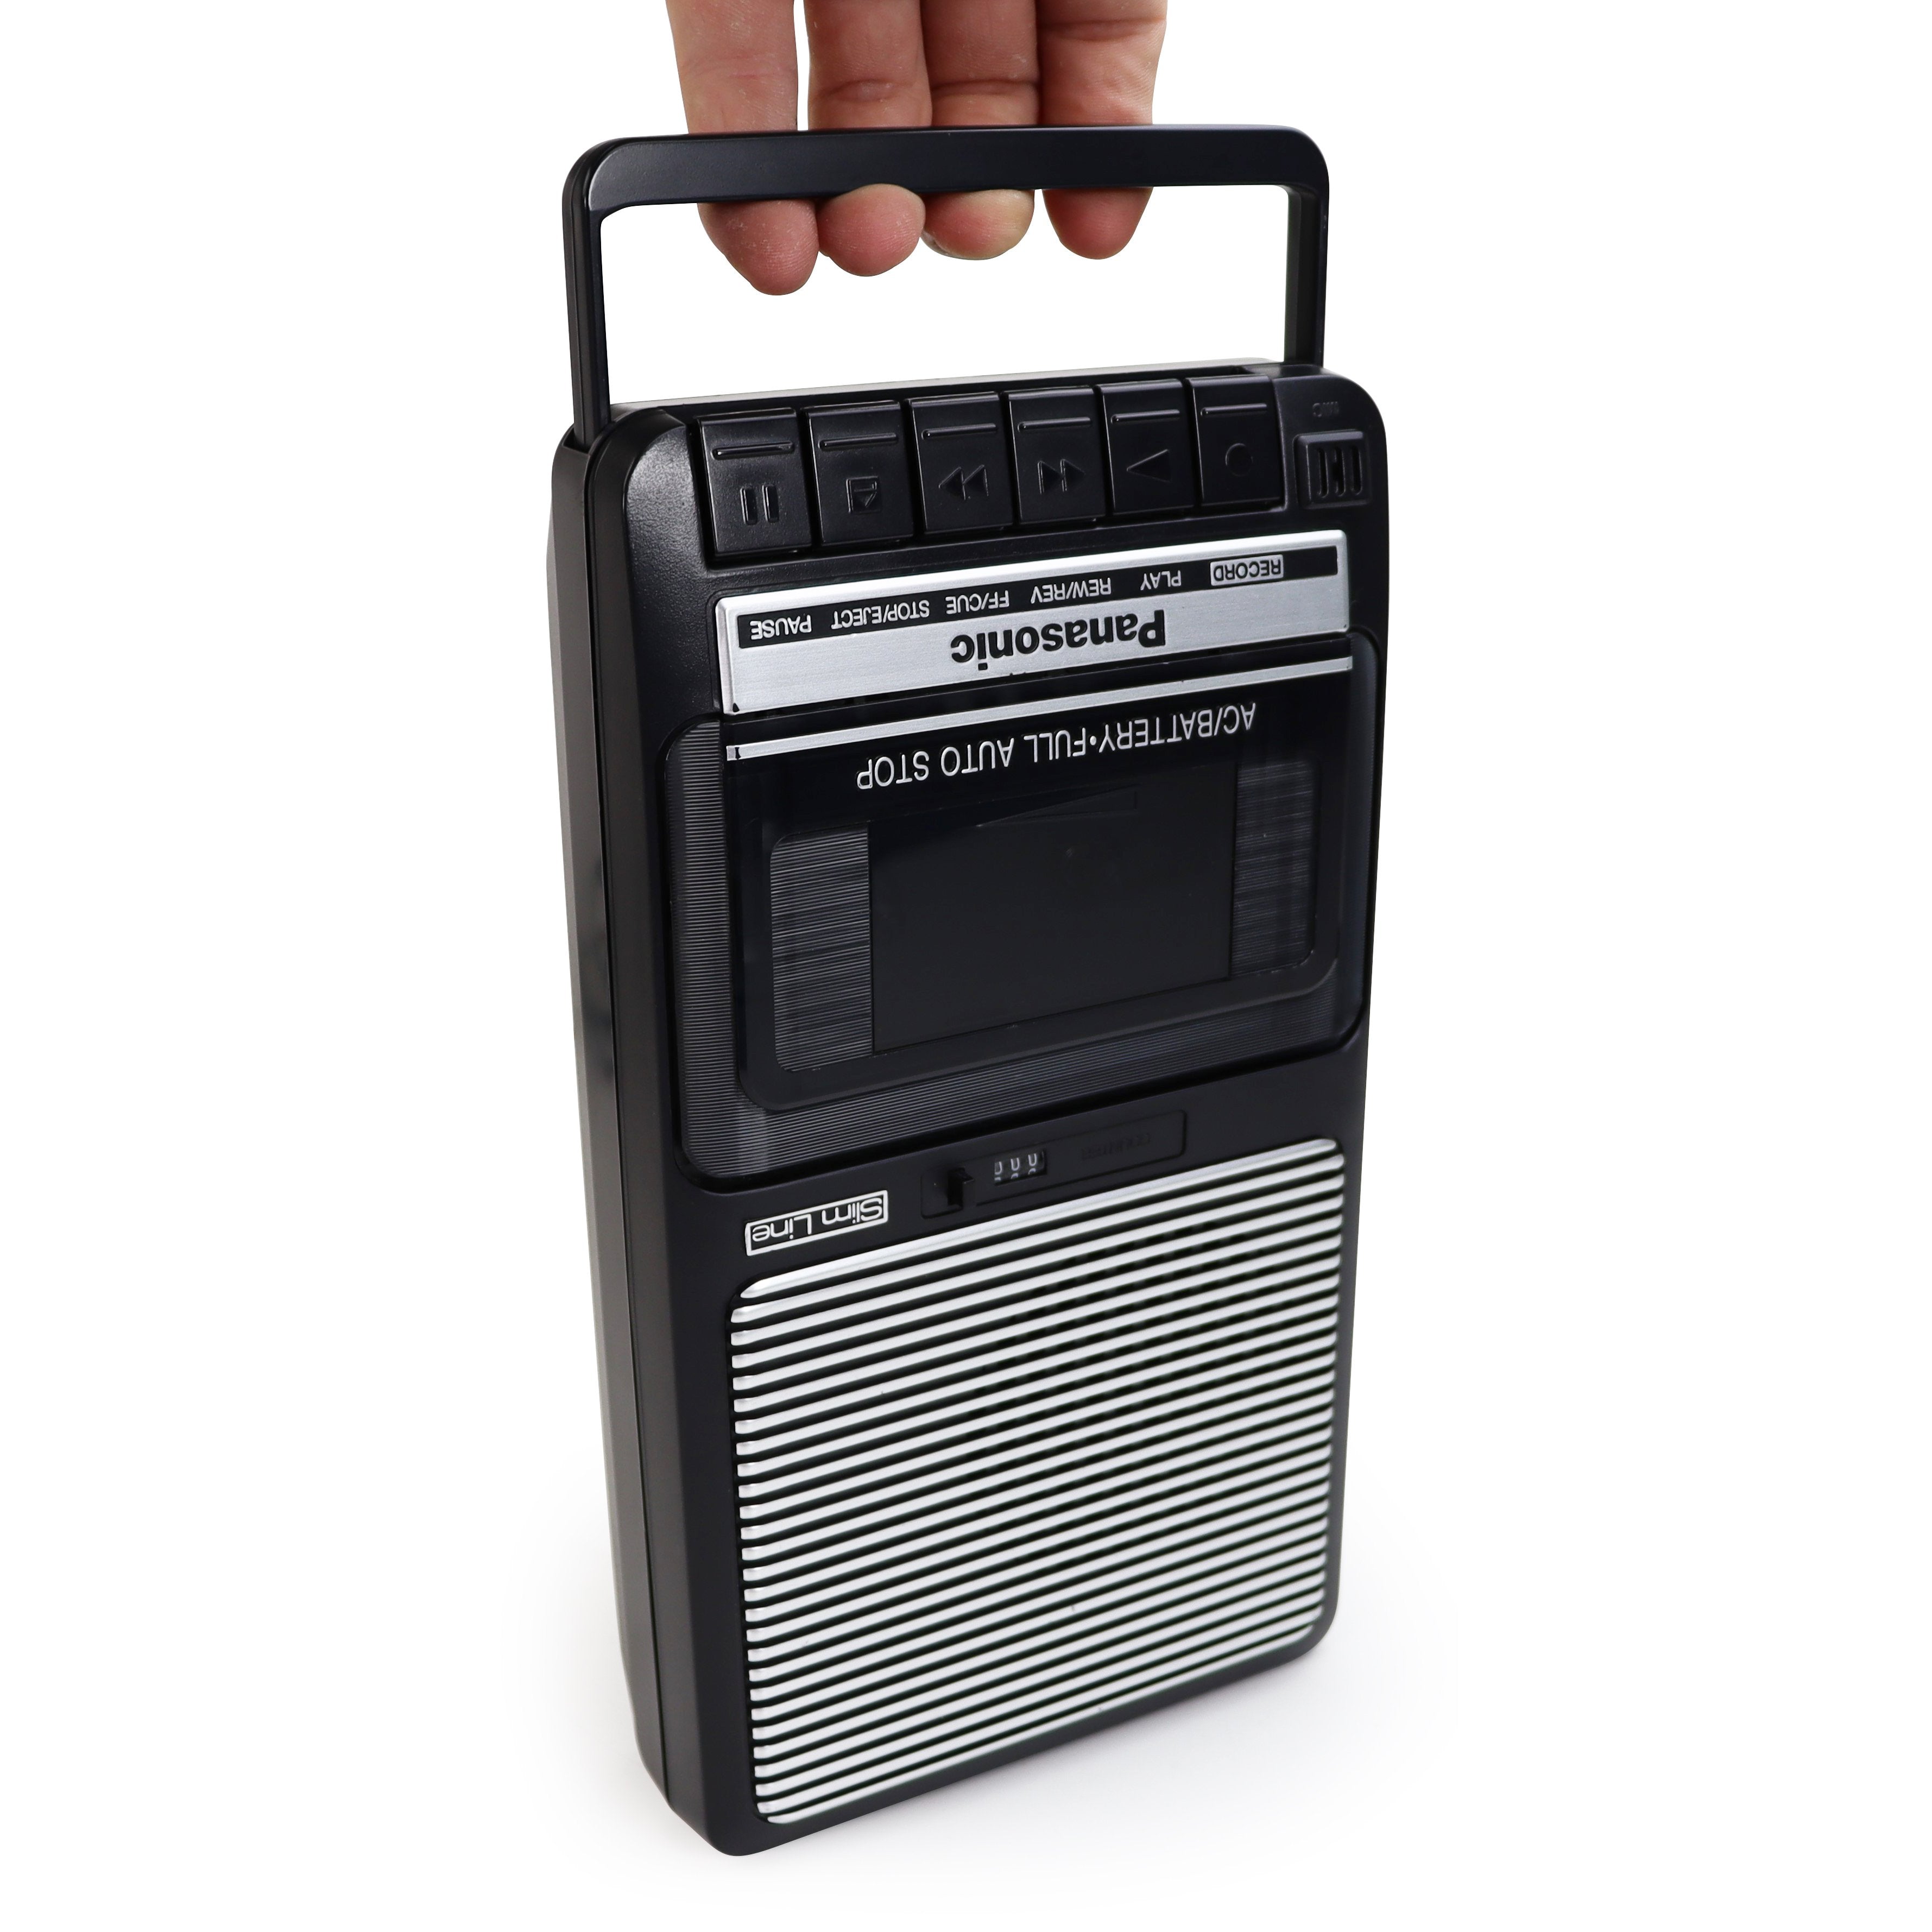 Cassette Player/Recorder :: Read Naturally, Inc.